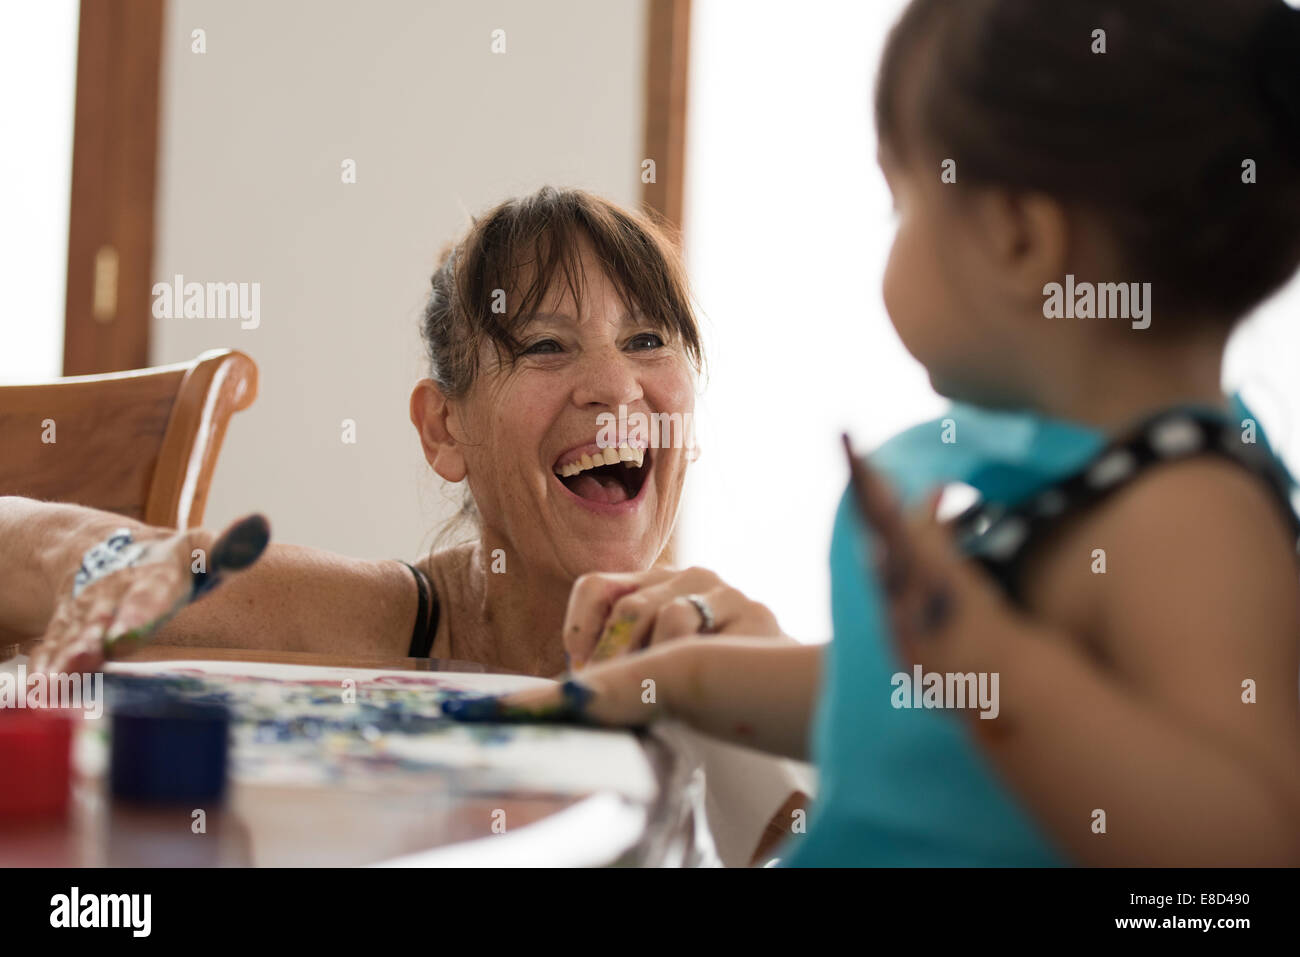 Grandmother finger painting with grandchild Stock Photo